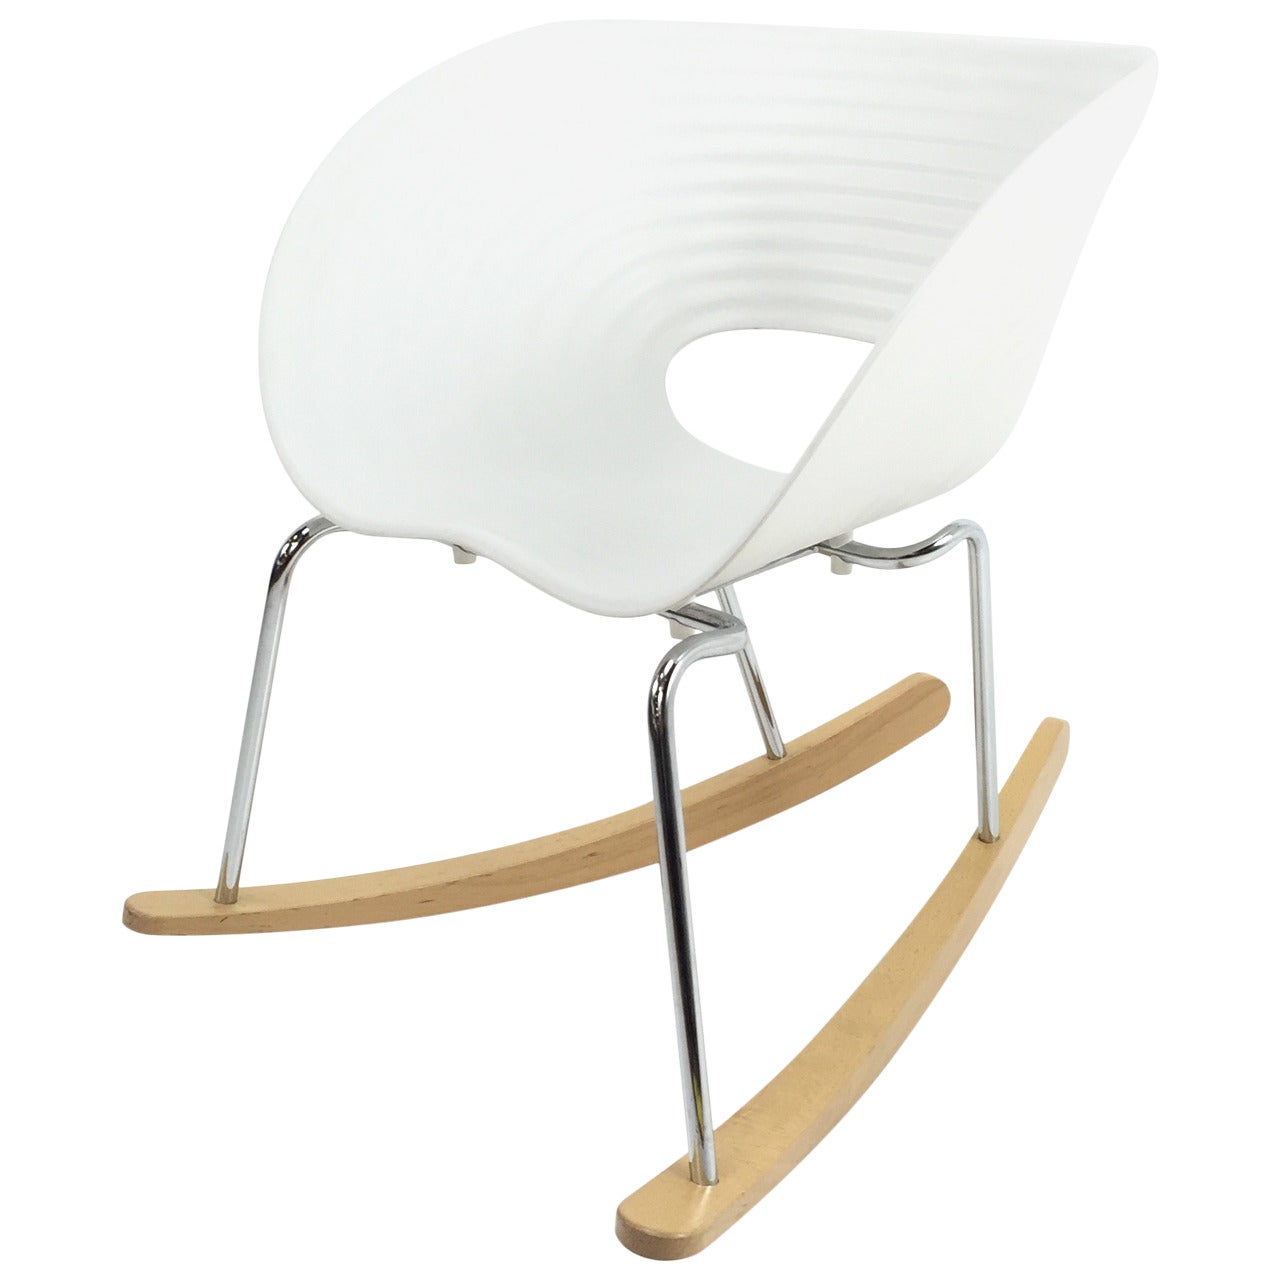 Out of Production Ron Arad "Tom Rock" Rocker for Vitra For Sale